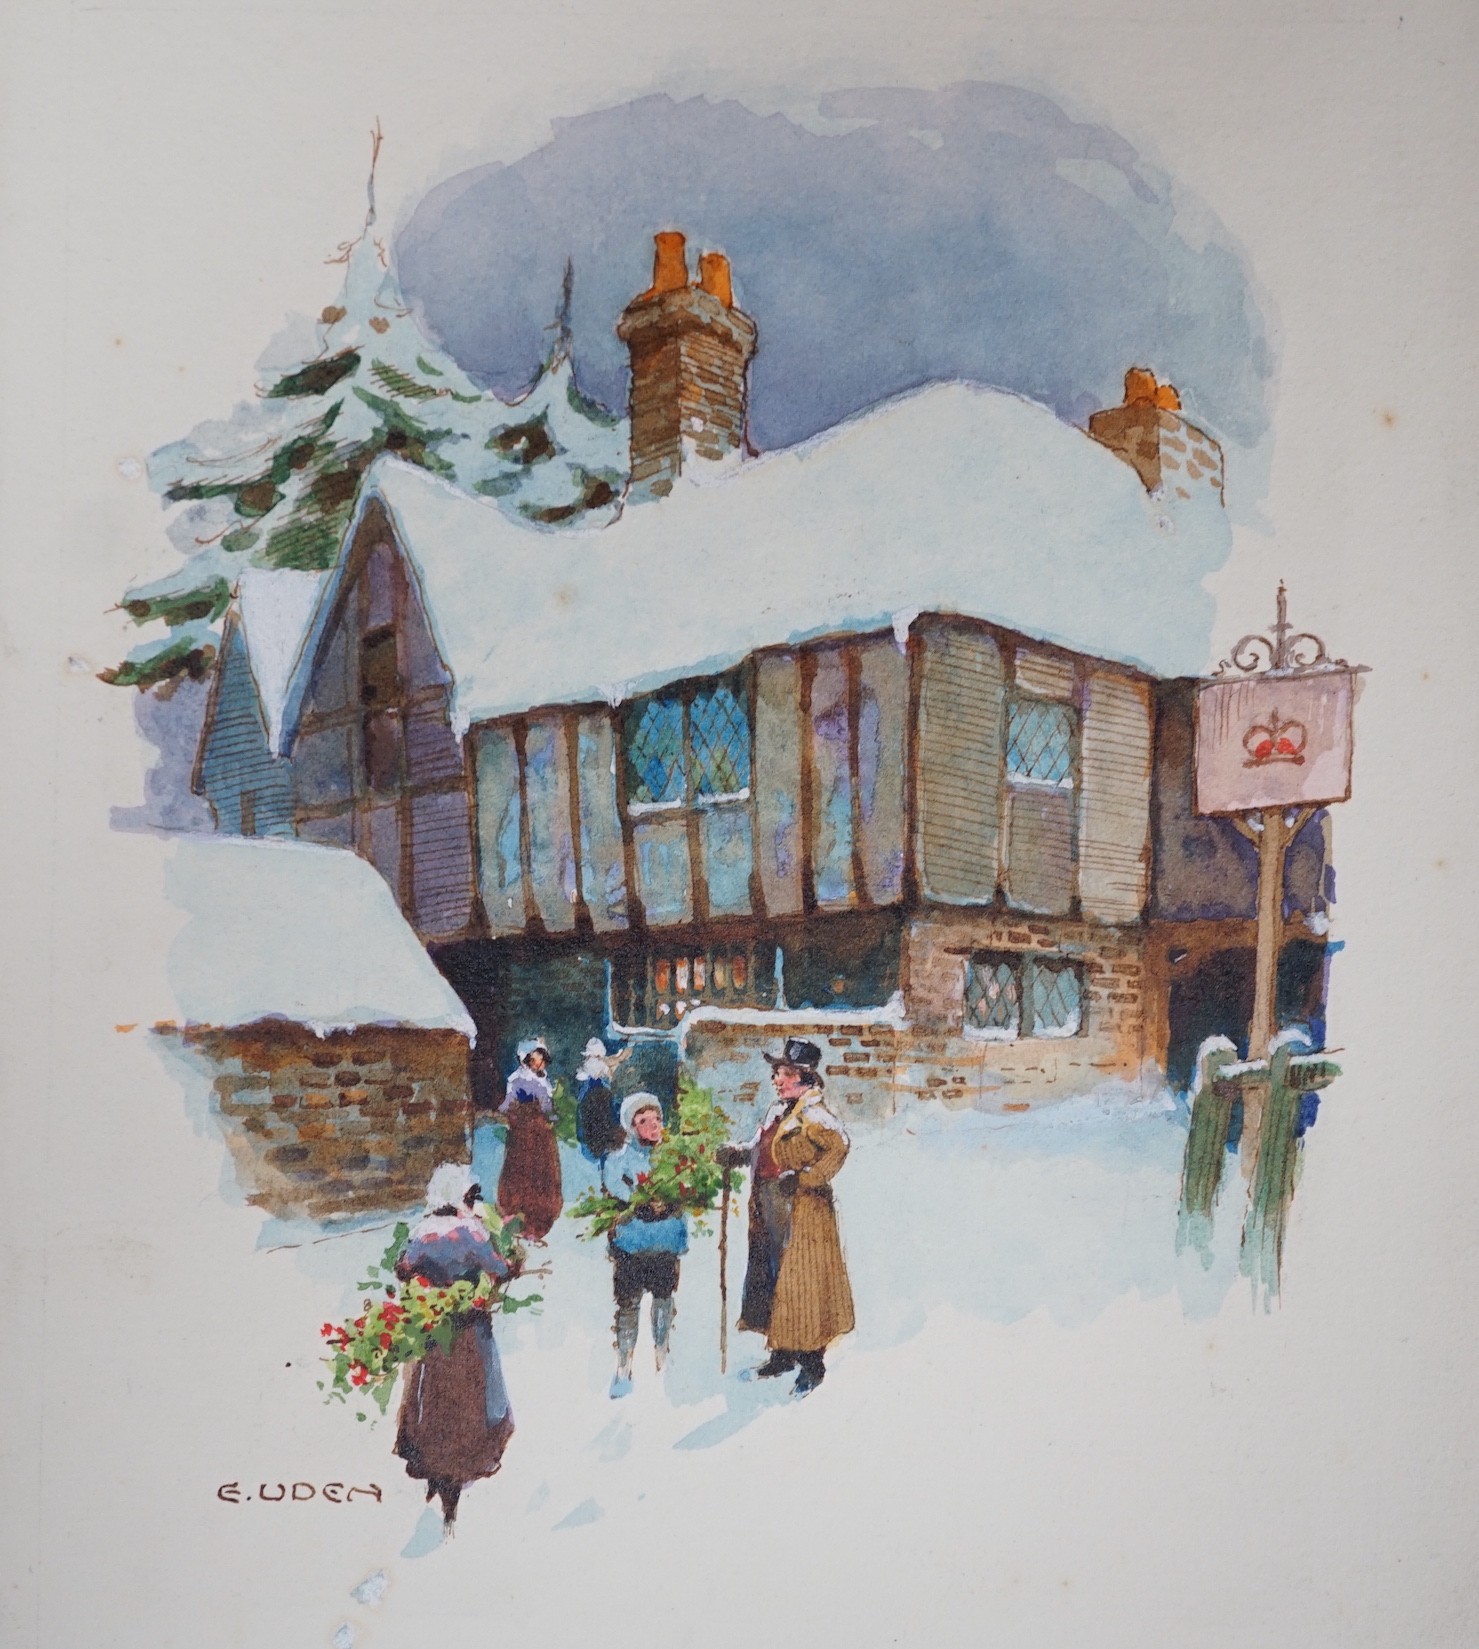 Ernest Uden (1911-1986), four watercolours with bodycolour, vintage greeting card designs, winter scenes, signed, 28 x 20cm, unframed